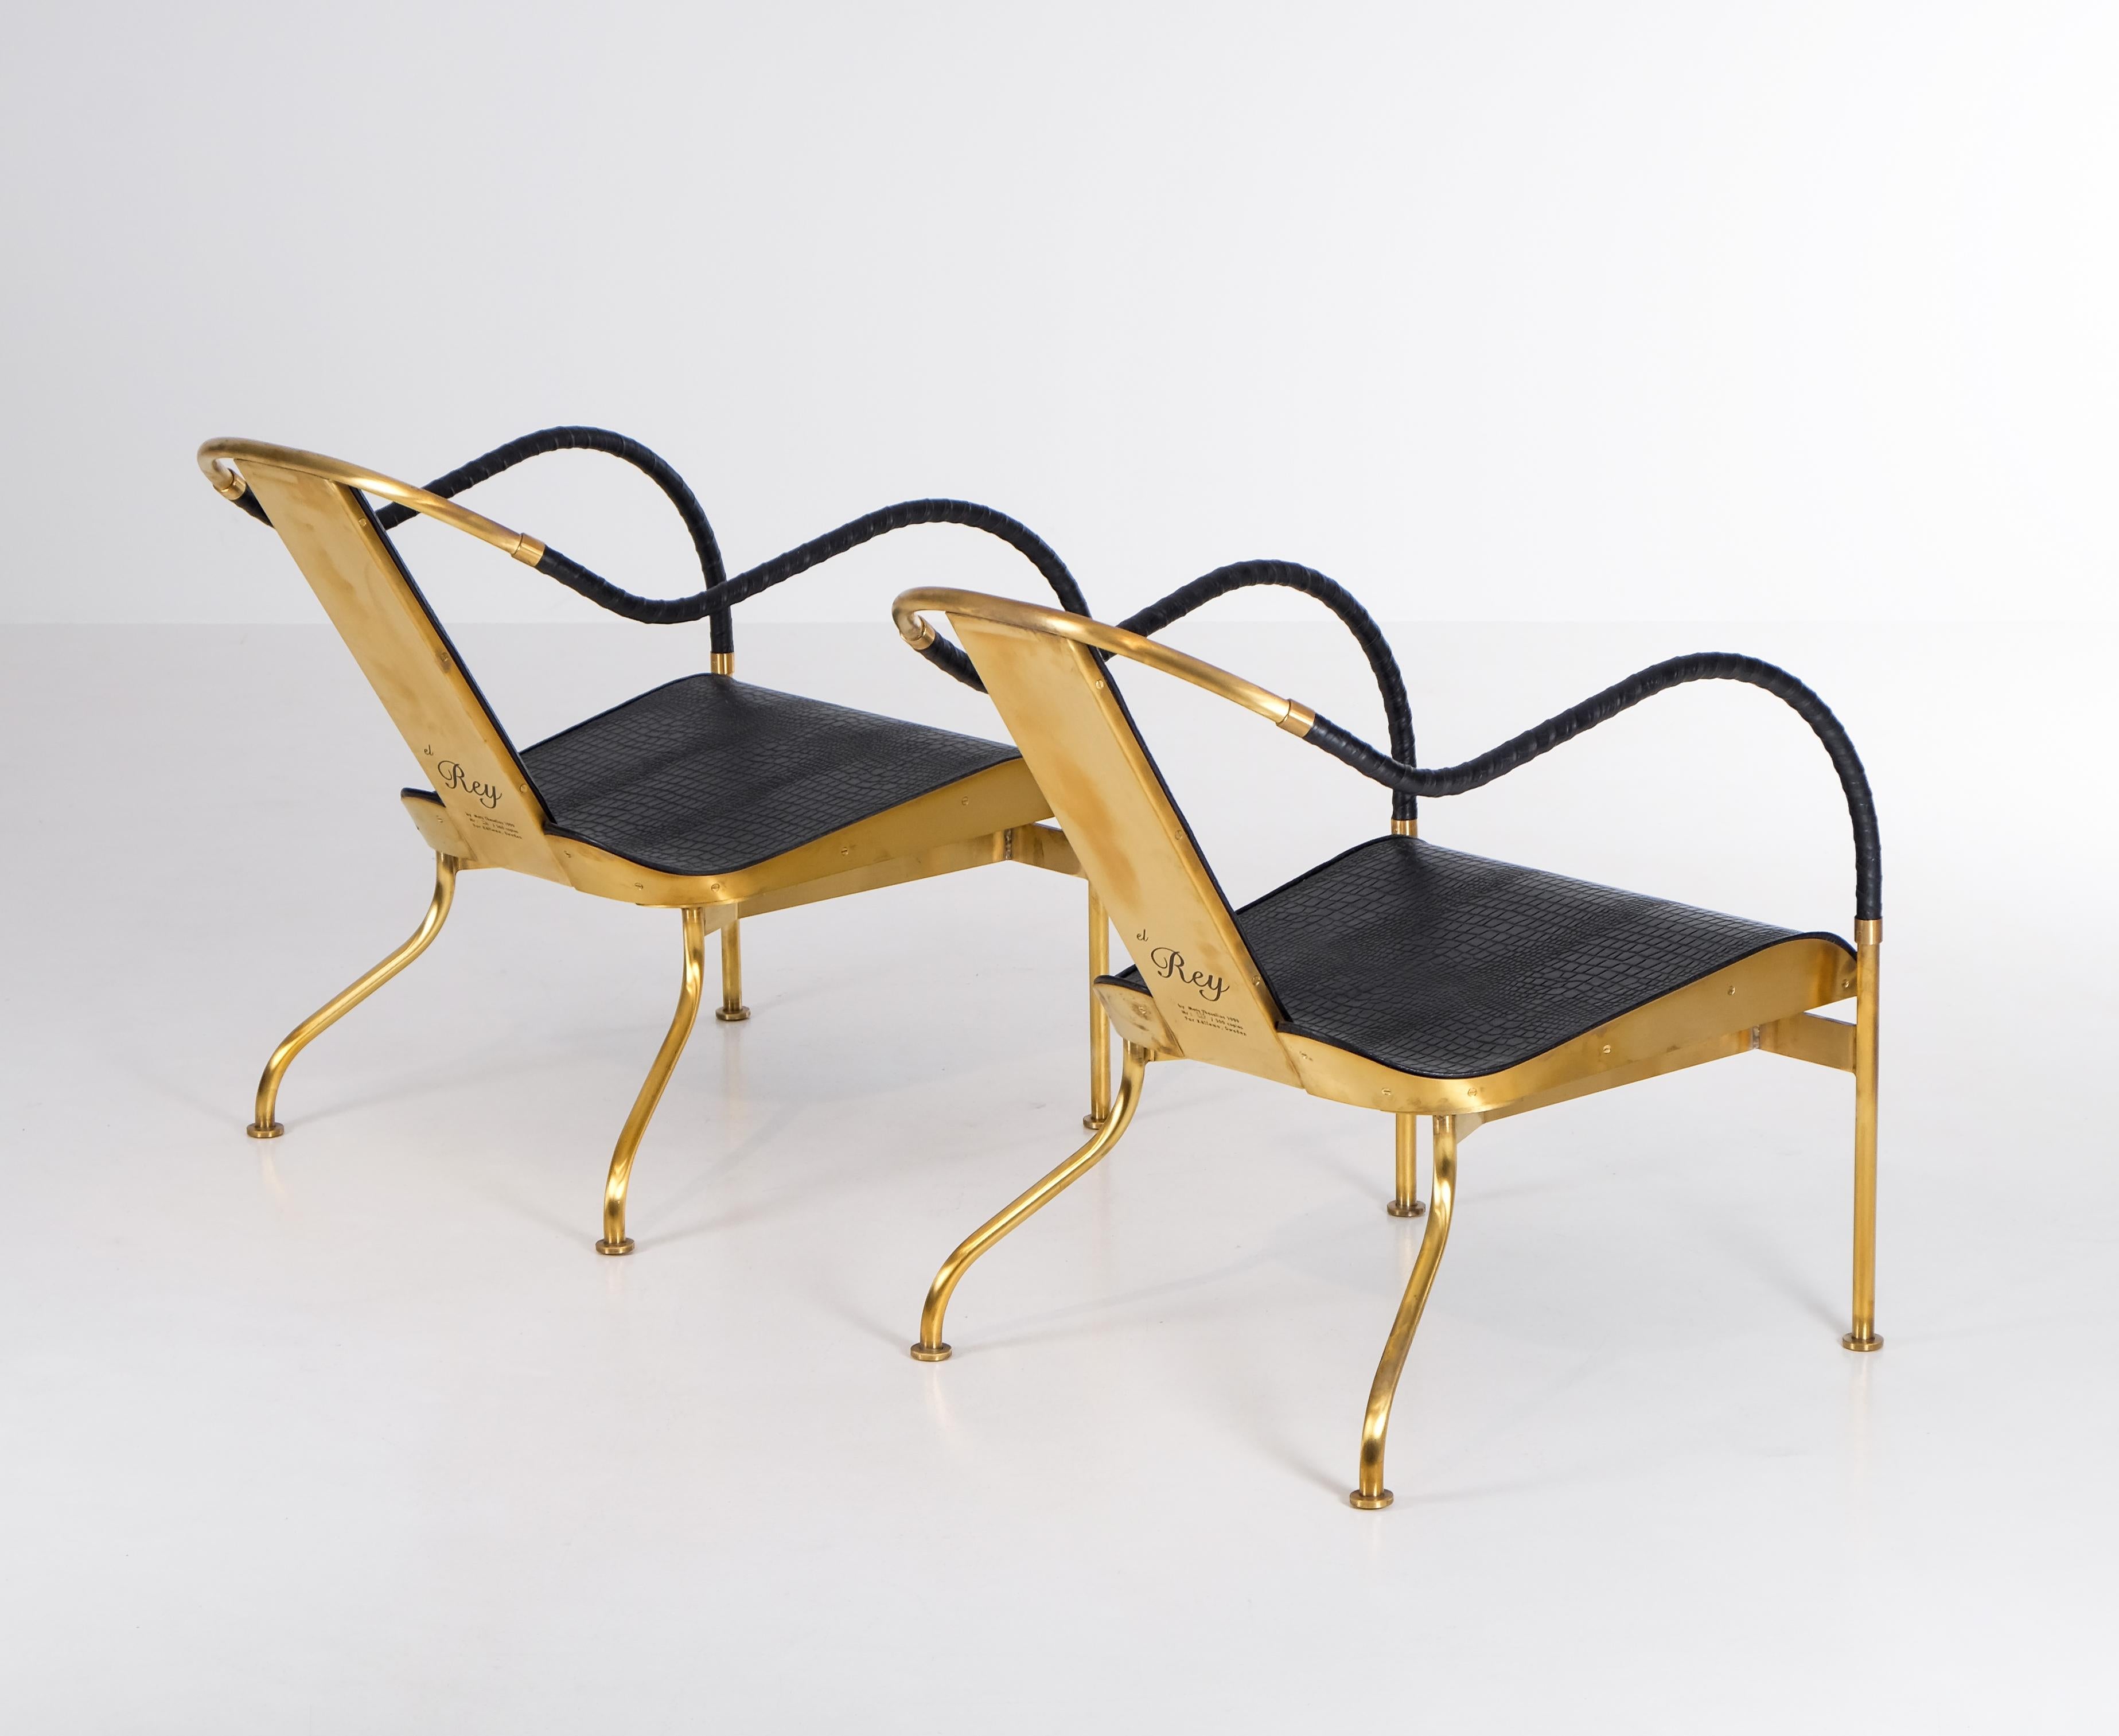 Brass frame, seat and back in crocodile patterned prime leather. Leatherclothes-wound armrests. Limited edition of 360 chairs produced in 1999. This is chair #234 and #235.
Excellent condition.